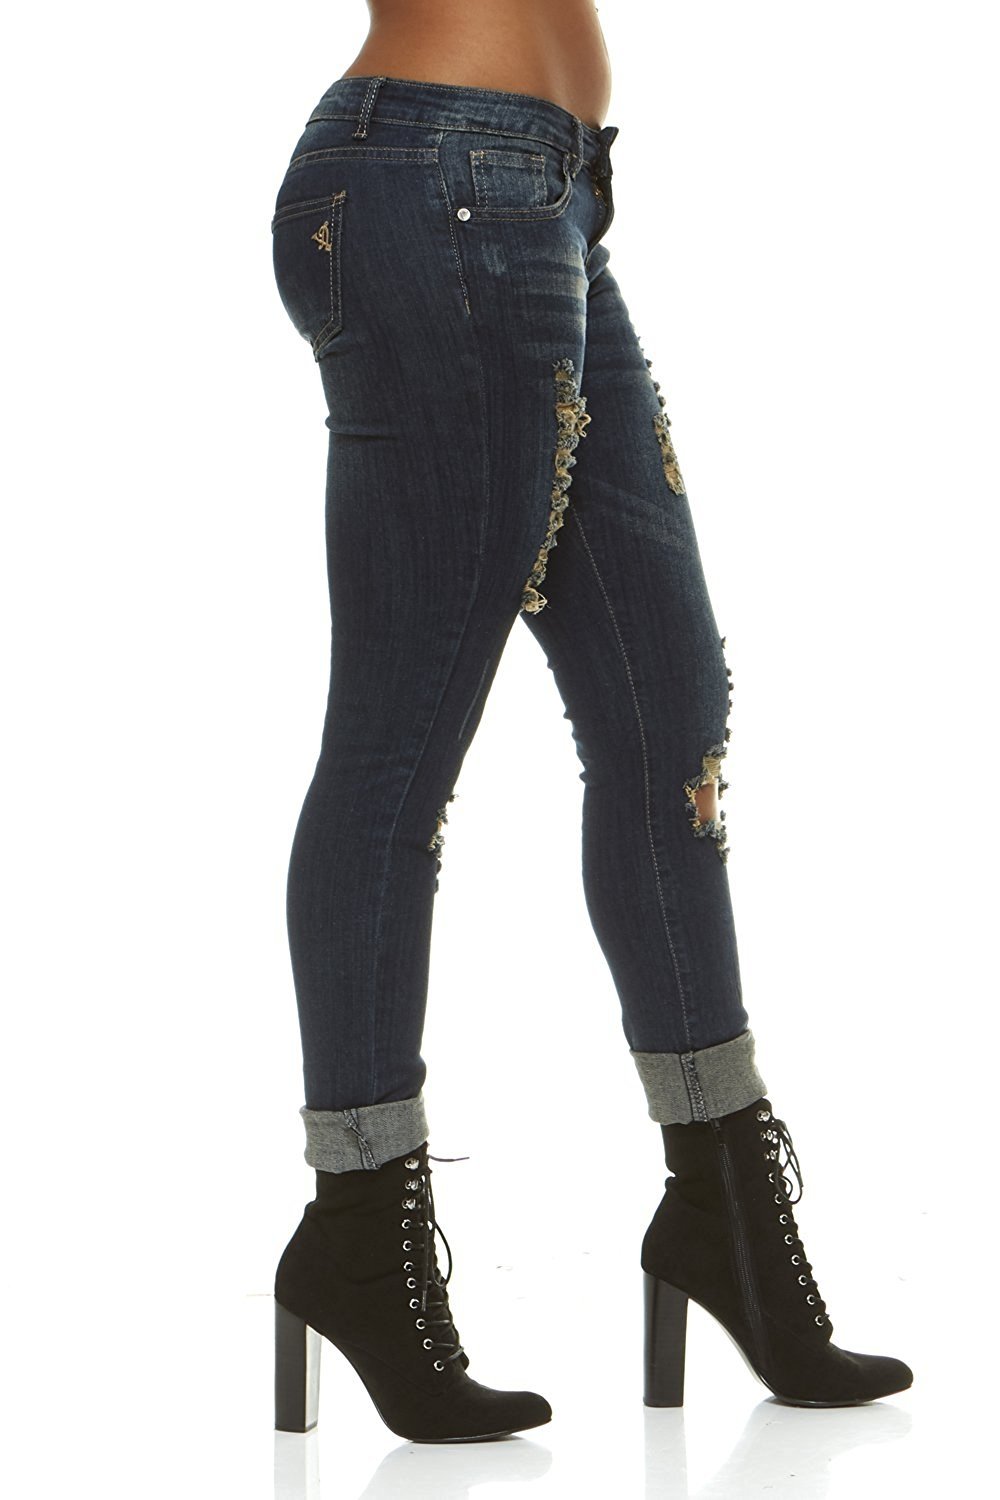 V.I.P.JEANS Ripped Distressed Washed Skinny Stretch Jeans For Women Junior or Plus Sizes - image 2 of 8